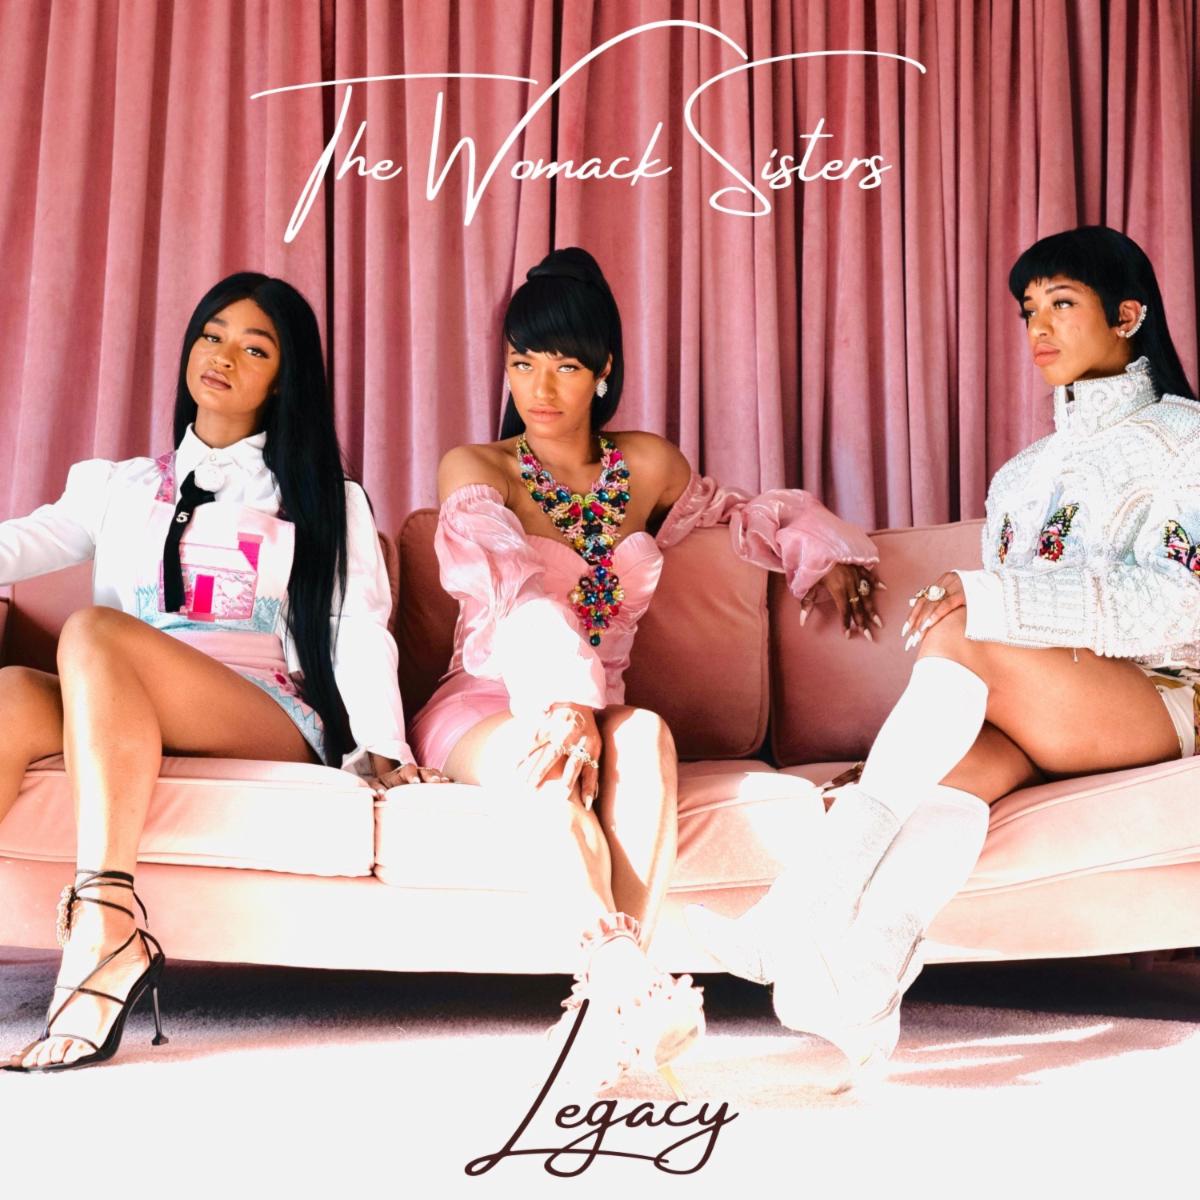 The Womack Sisters Legacy EP Cover